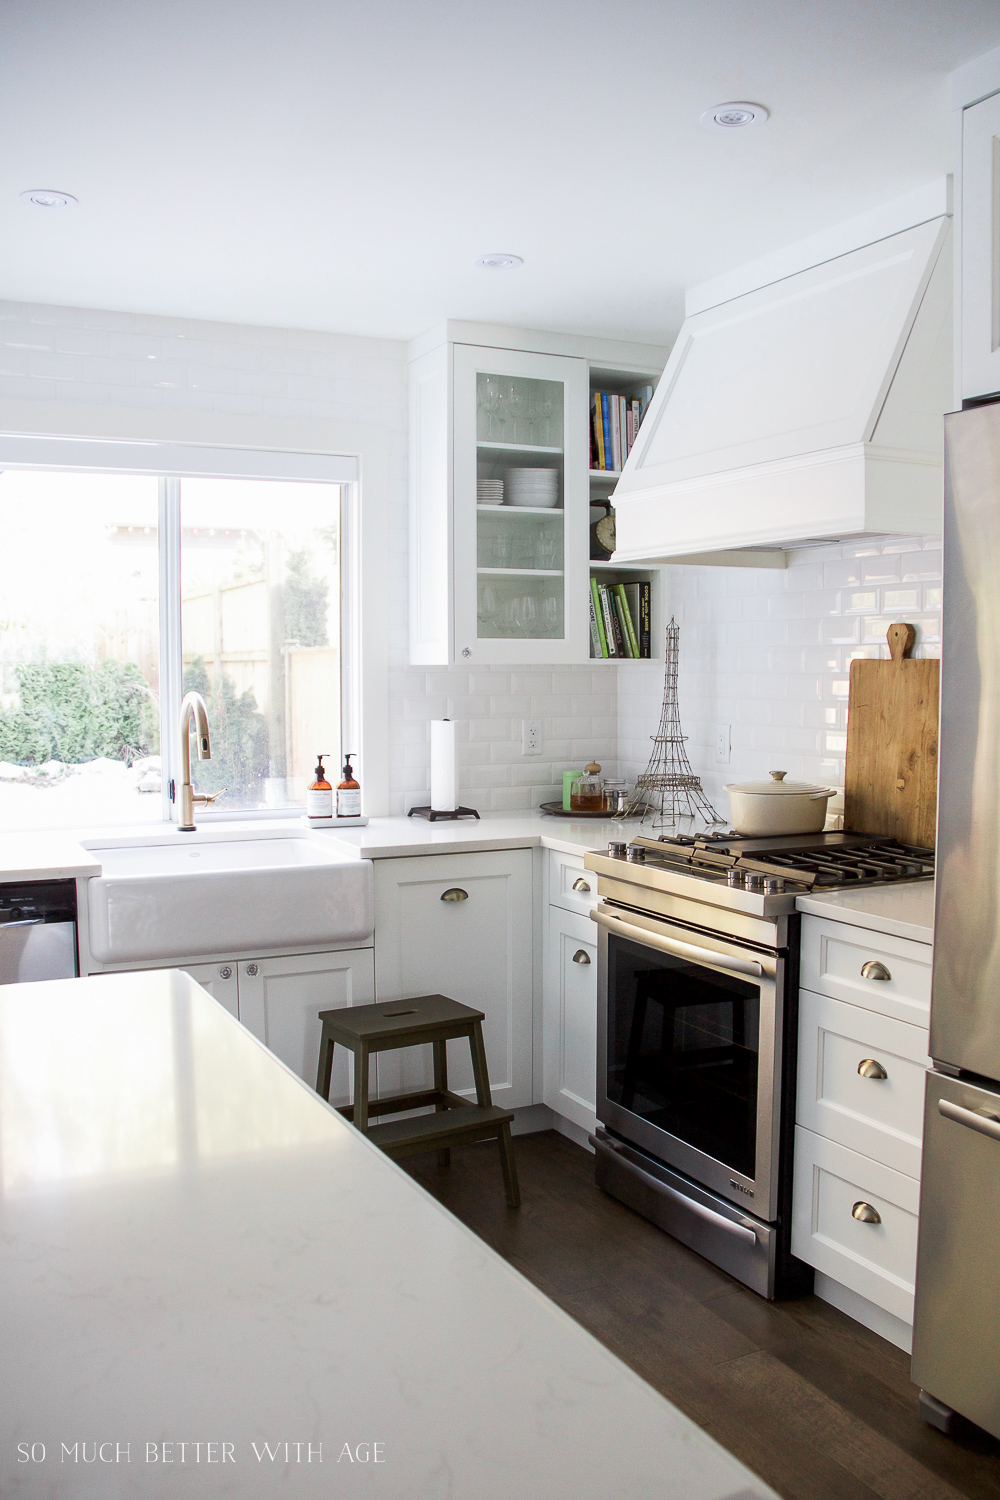 My Big Beautiful Kitchen Renovation Before and After Photos - So Much Better With Age